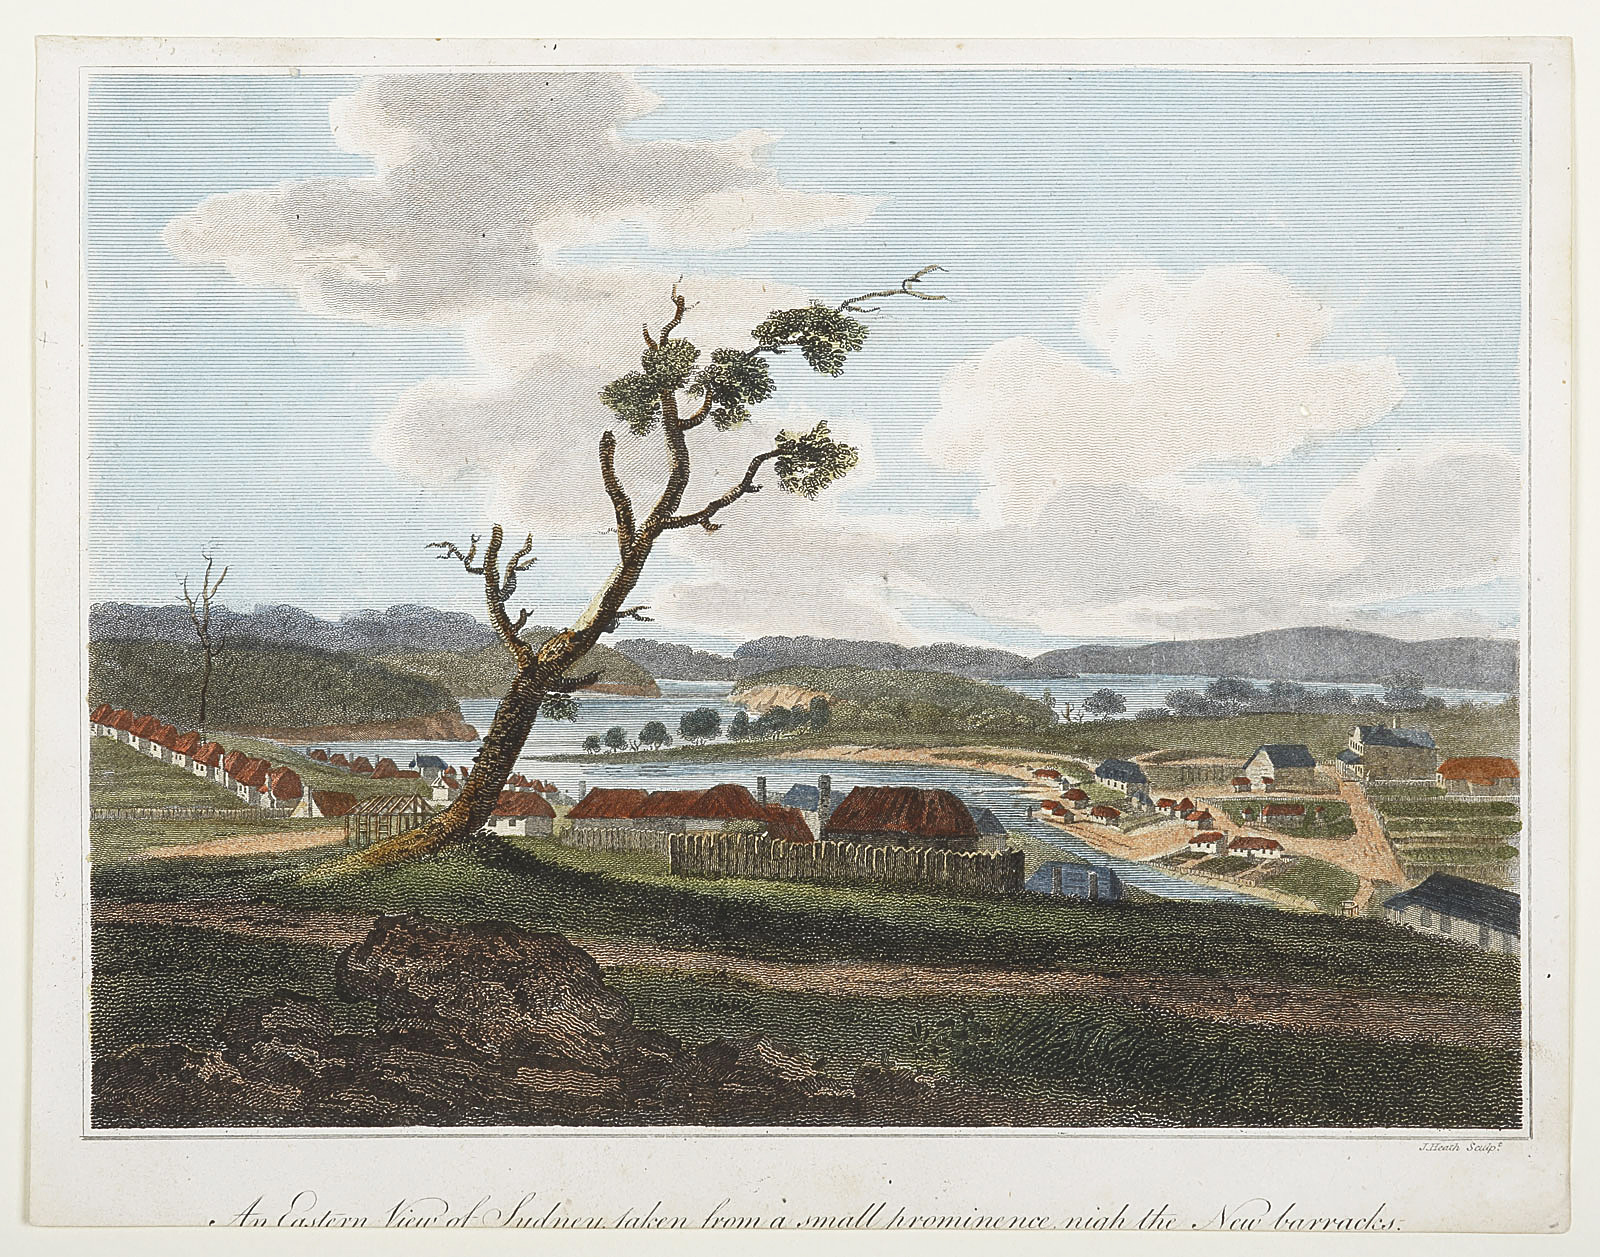 An Eastern View of Sydney taken from a small prominence nigh the New Barracks. - Antique View from 1803